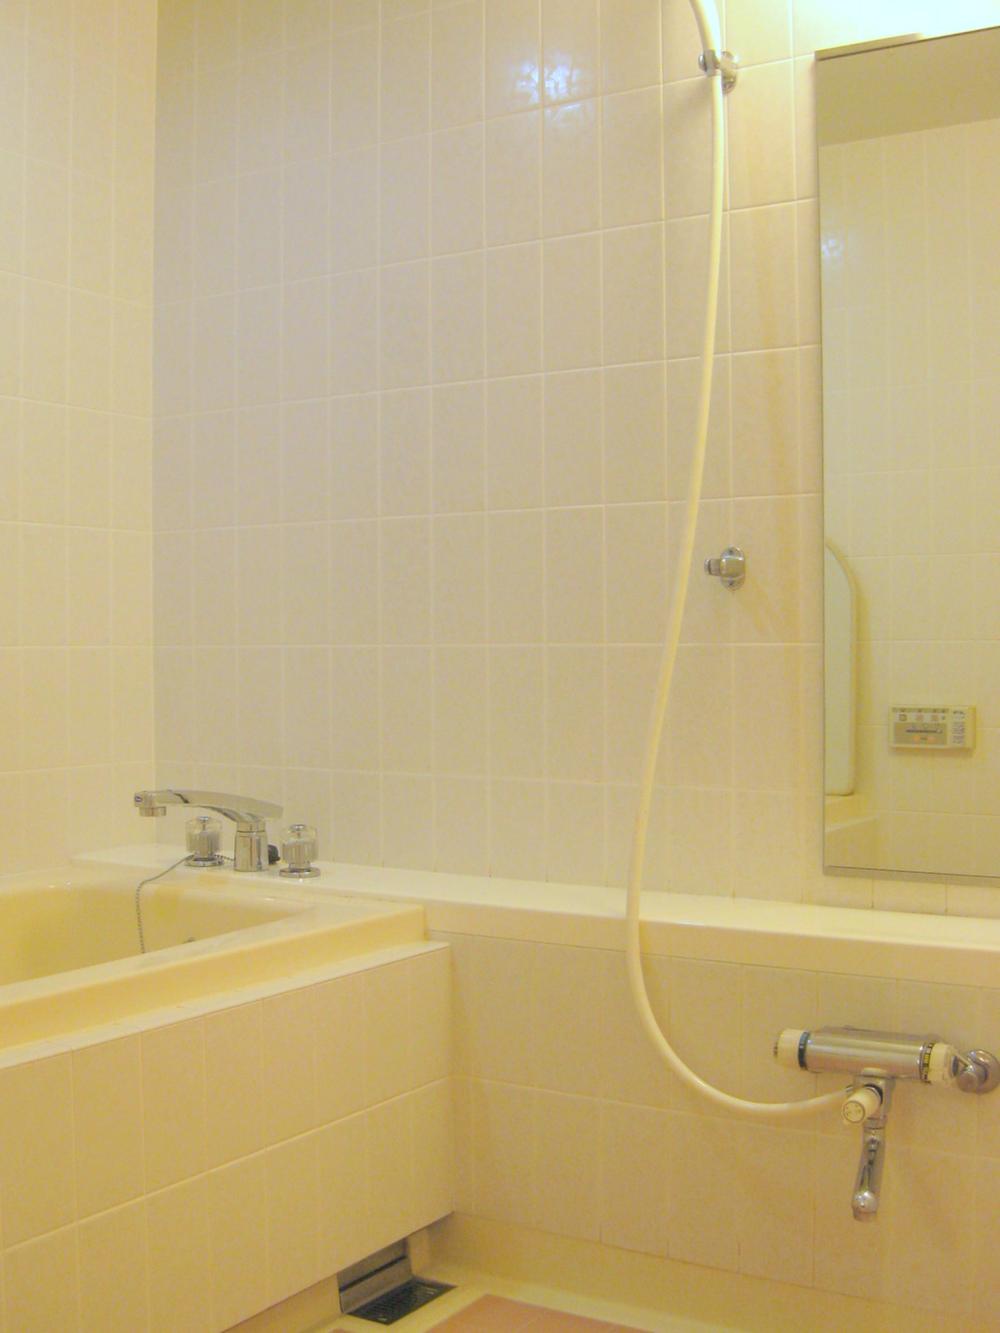 Bathroom. Bathroom is the size of a rare 1620 in the apartment Indoor (11 May 2013) Shooting